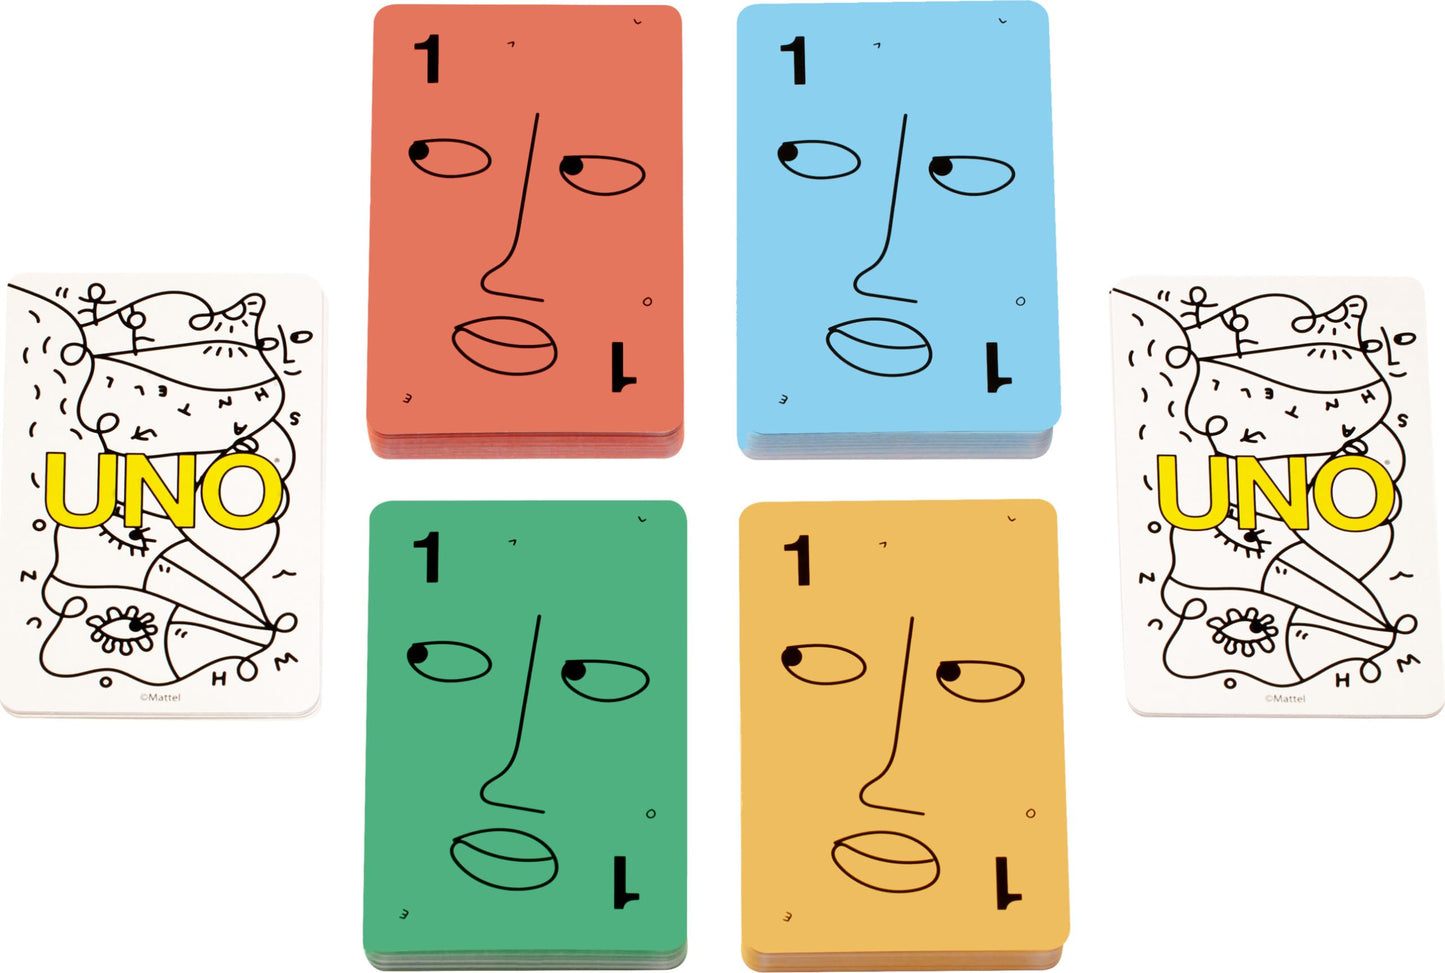 UNO Artiste Shantell Martin Card Game for Kids, Adults & Family Night, Collectible Deck Featuring Graphics & Art by Shantell Martin